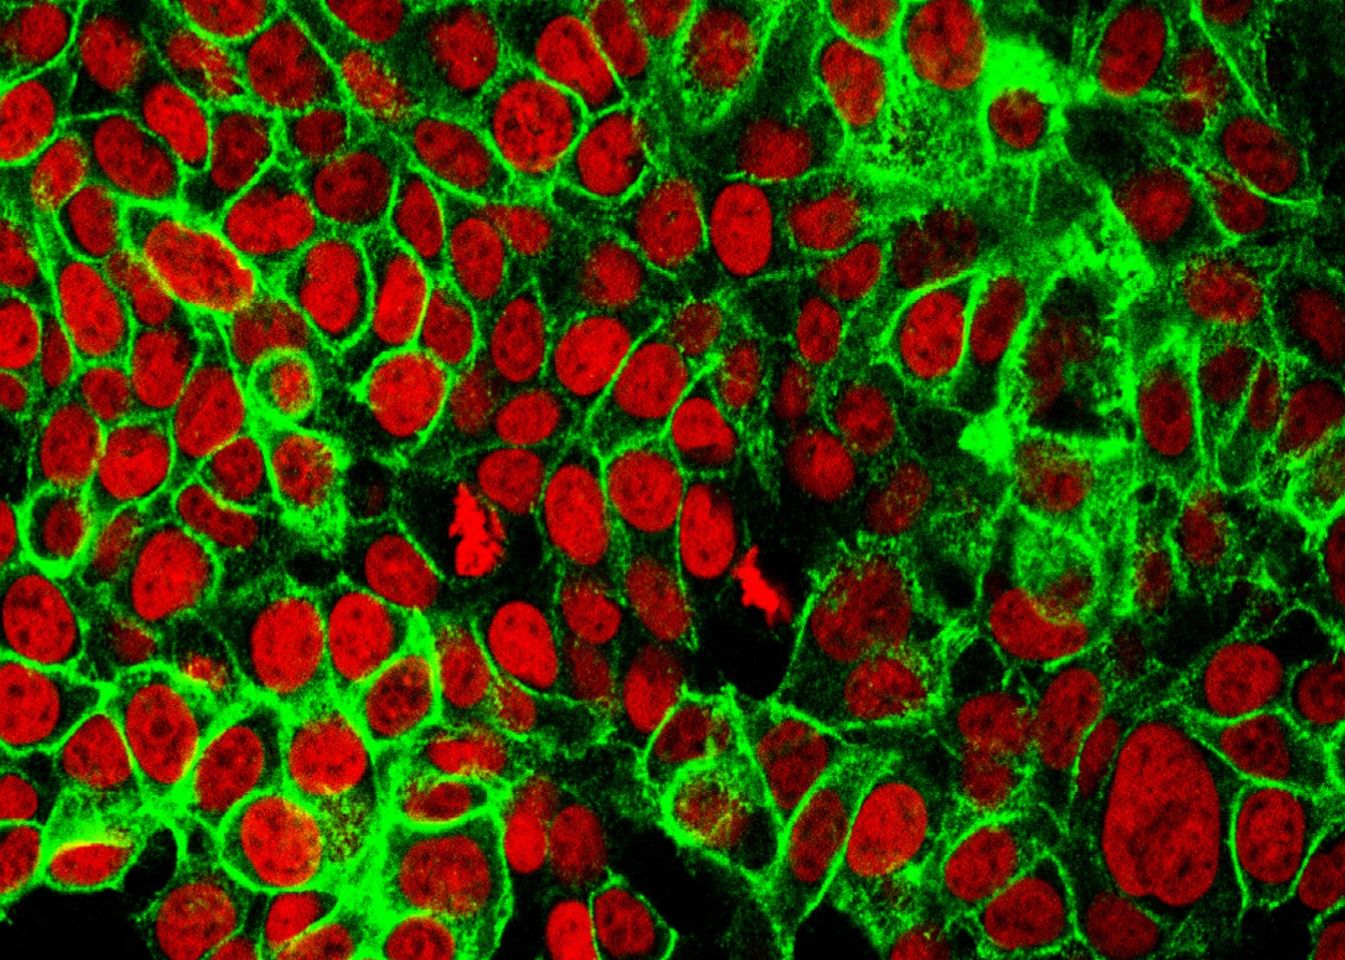 Human colon cancer cells with the cell nuclei stained red and the protein E-cadherin stained green. E-cadherin is a cell adhesion molecule and its loss signals a process known as the epithelial-mesenchymal transition in which cells acquire the ability to migrate and become invasive.